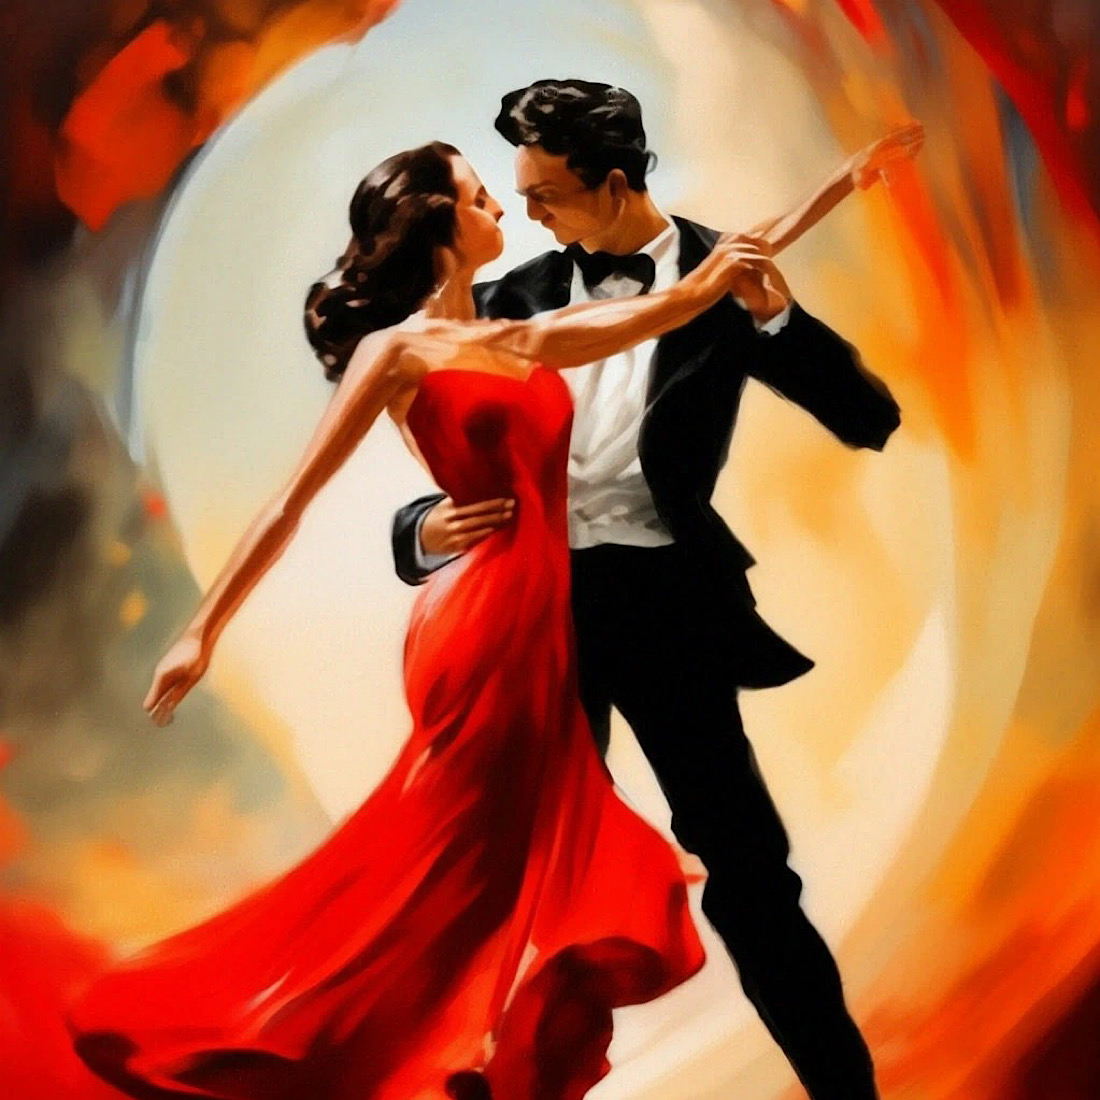 Dali-style oil painting "Tango" preview image.